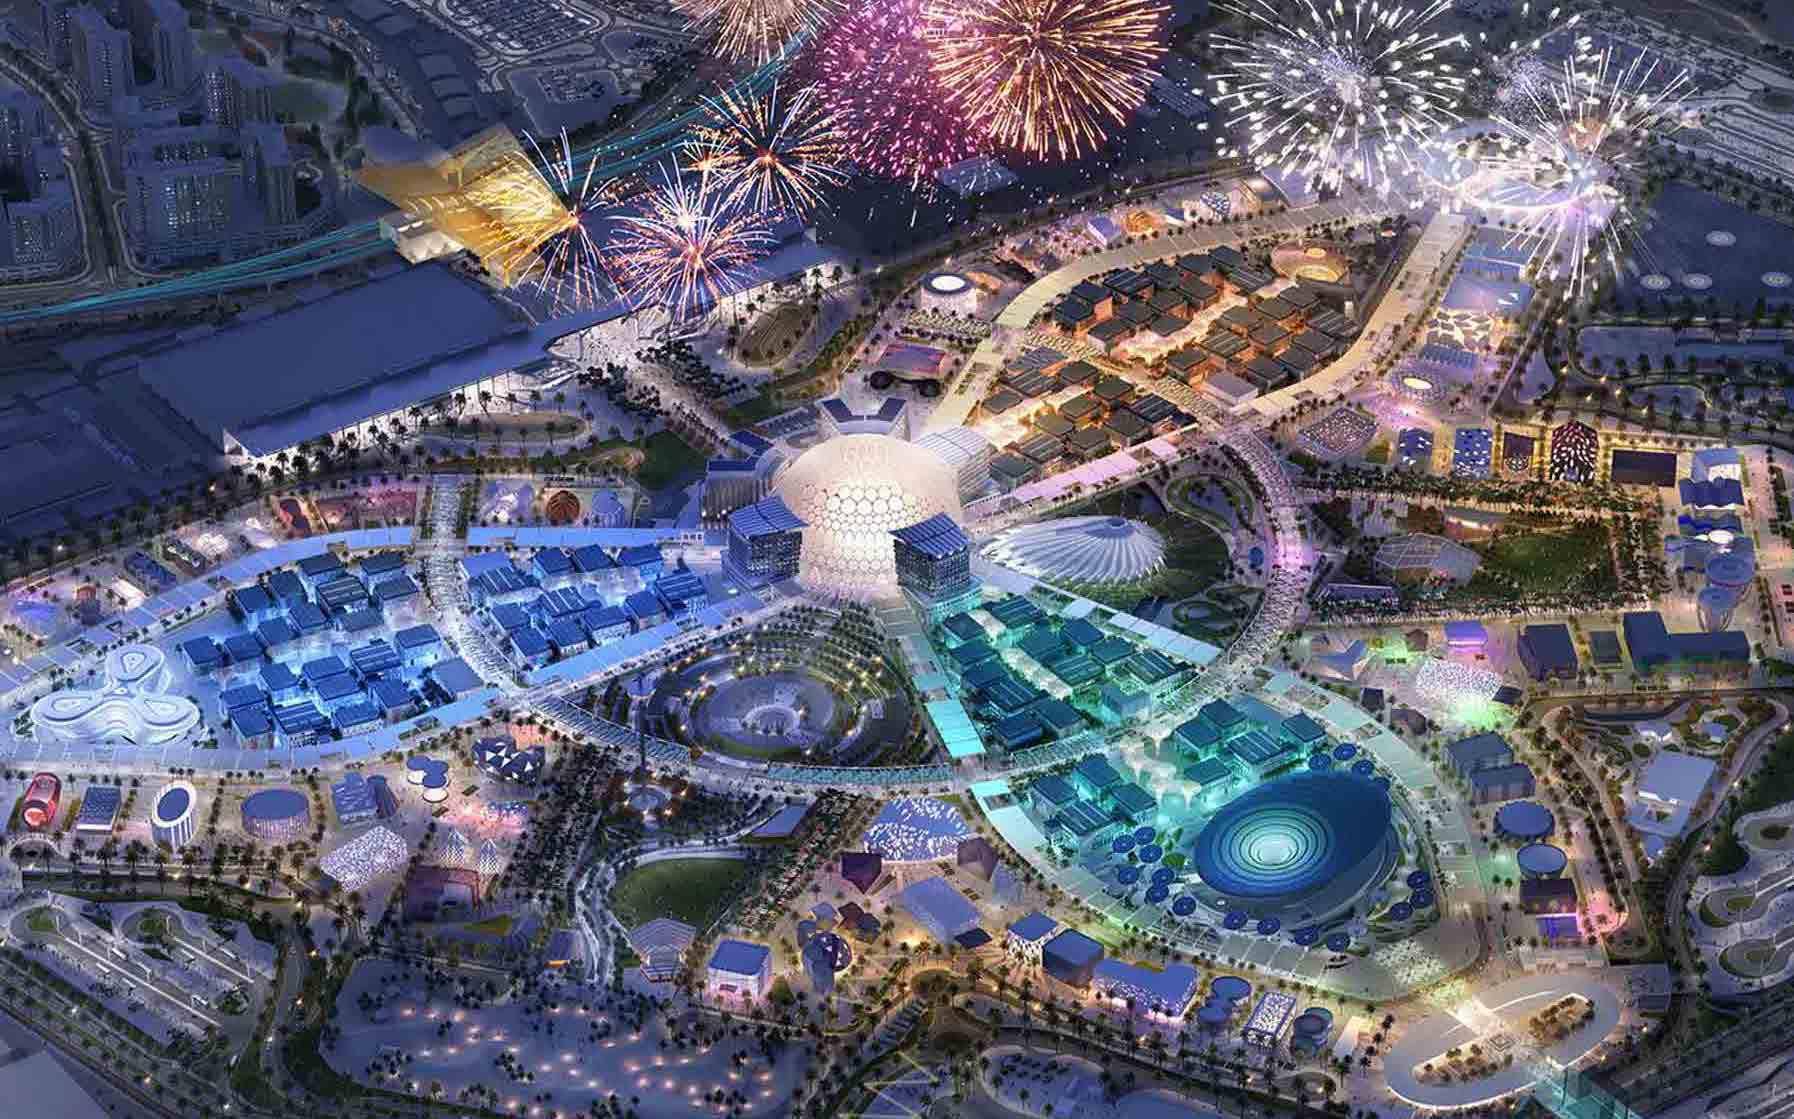 Expo 2020 Dubai: Ticket prices, free tickets and discounts announced